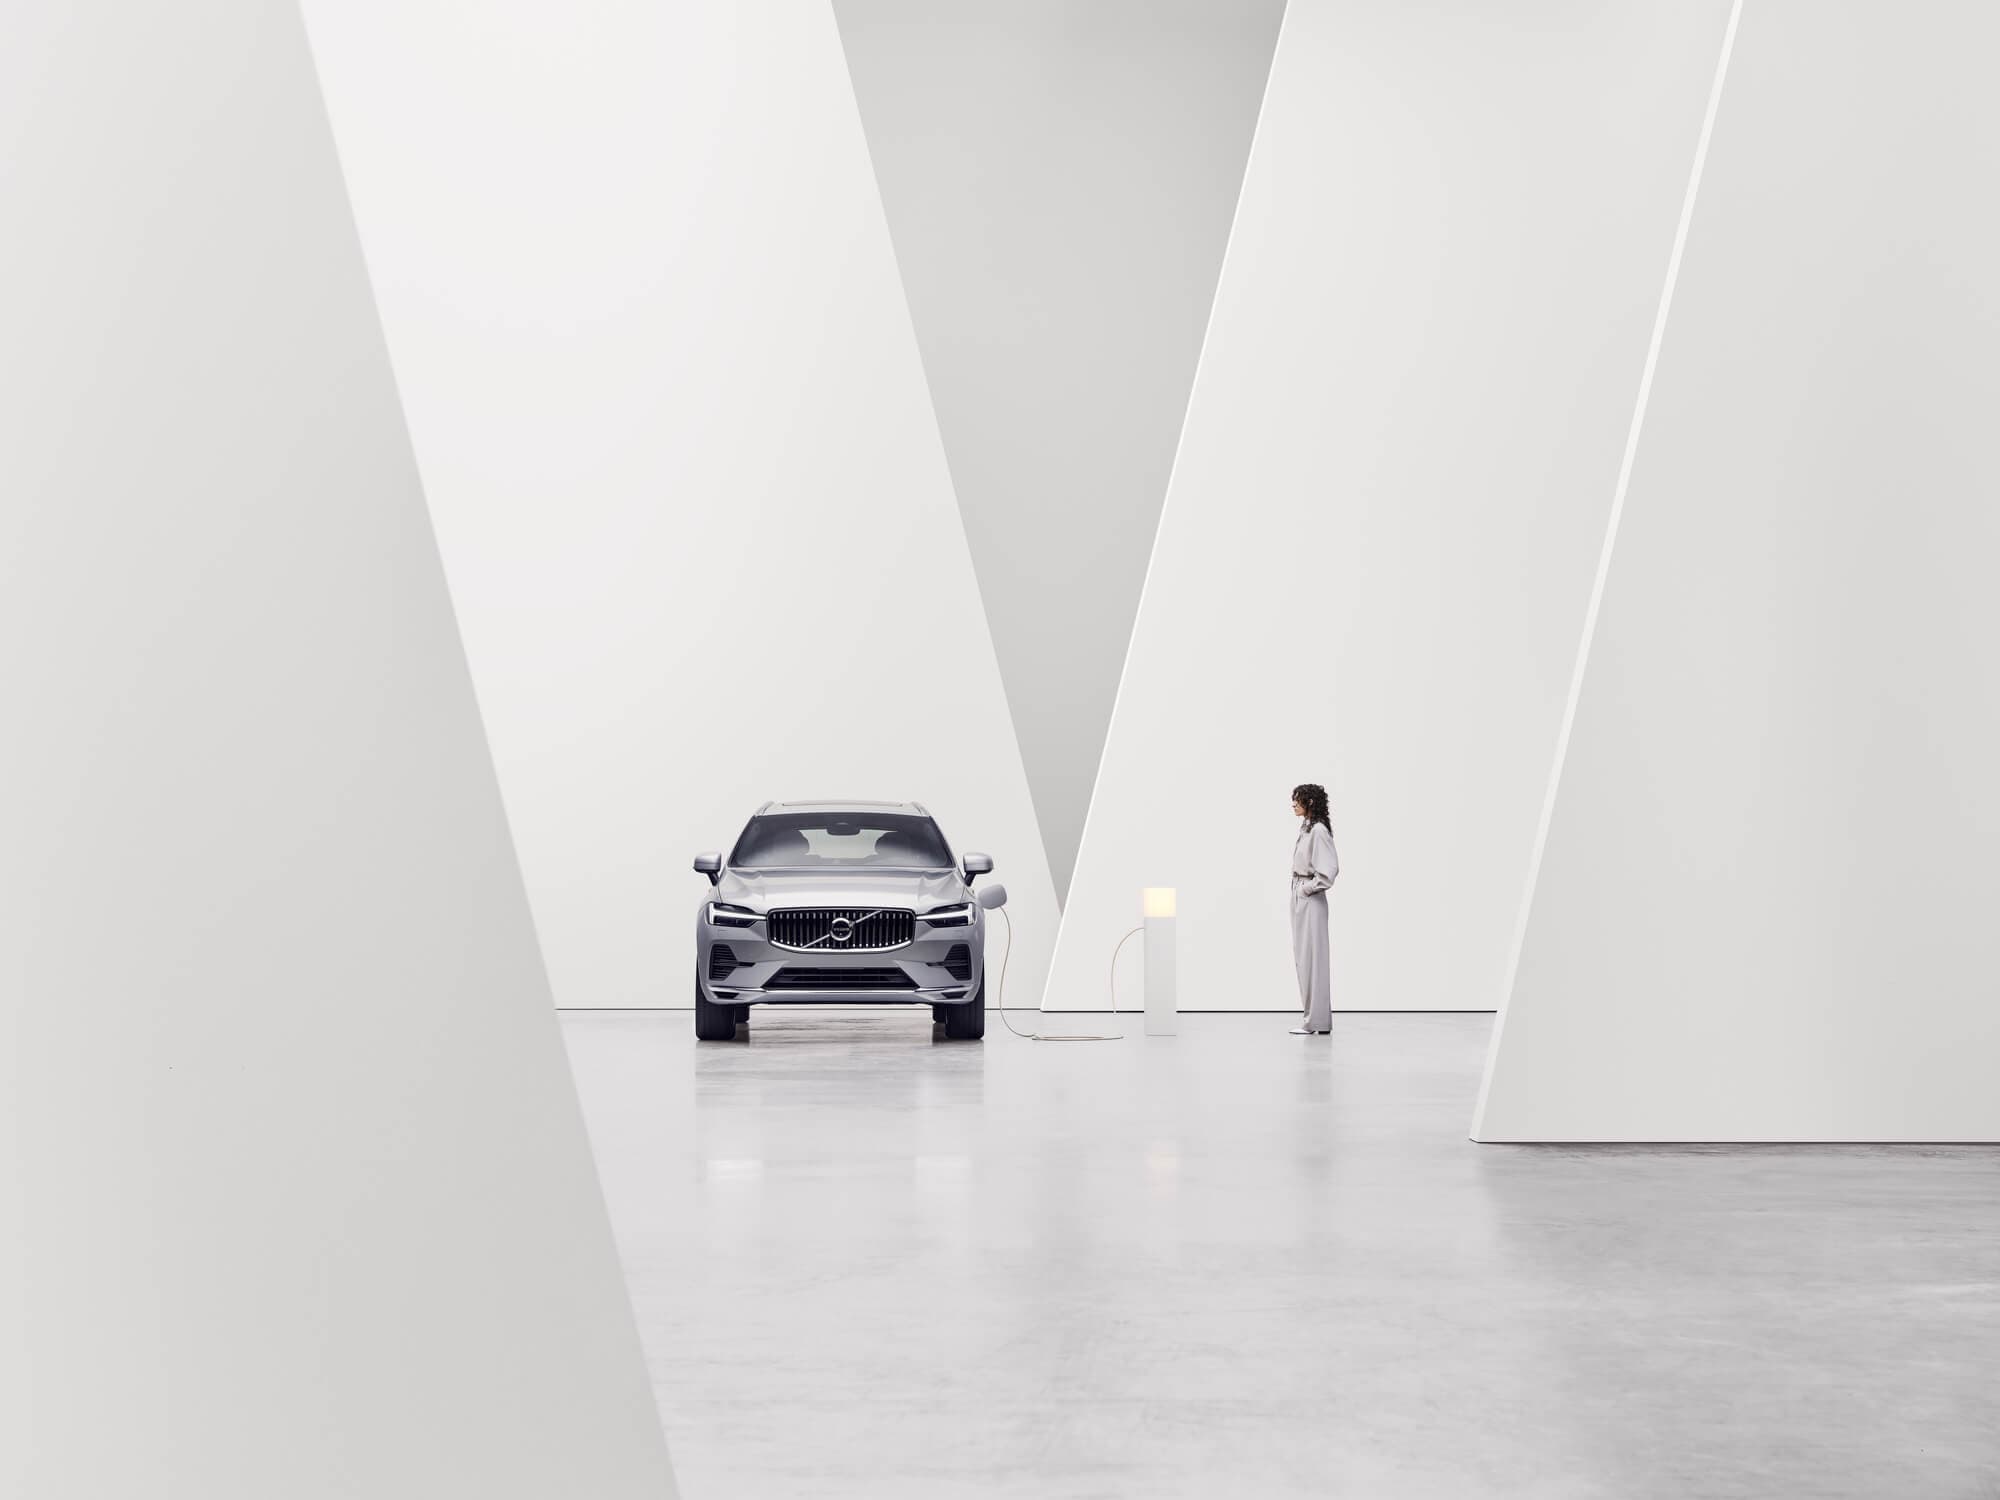 Volvo beside charging post seen from front in white interior environment